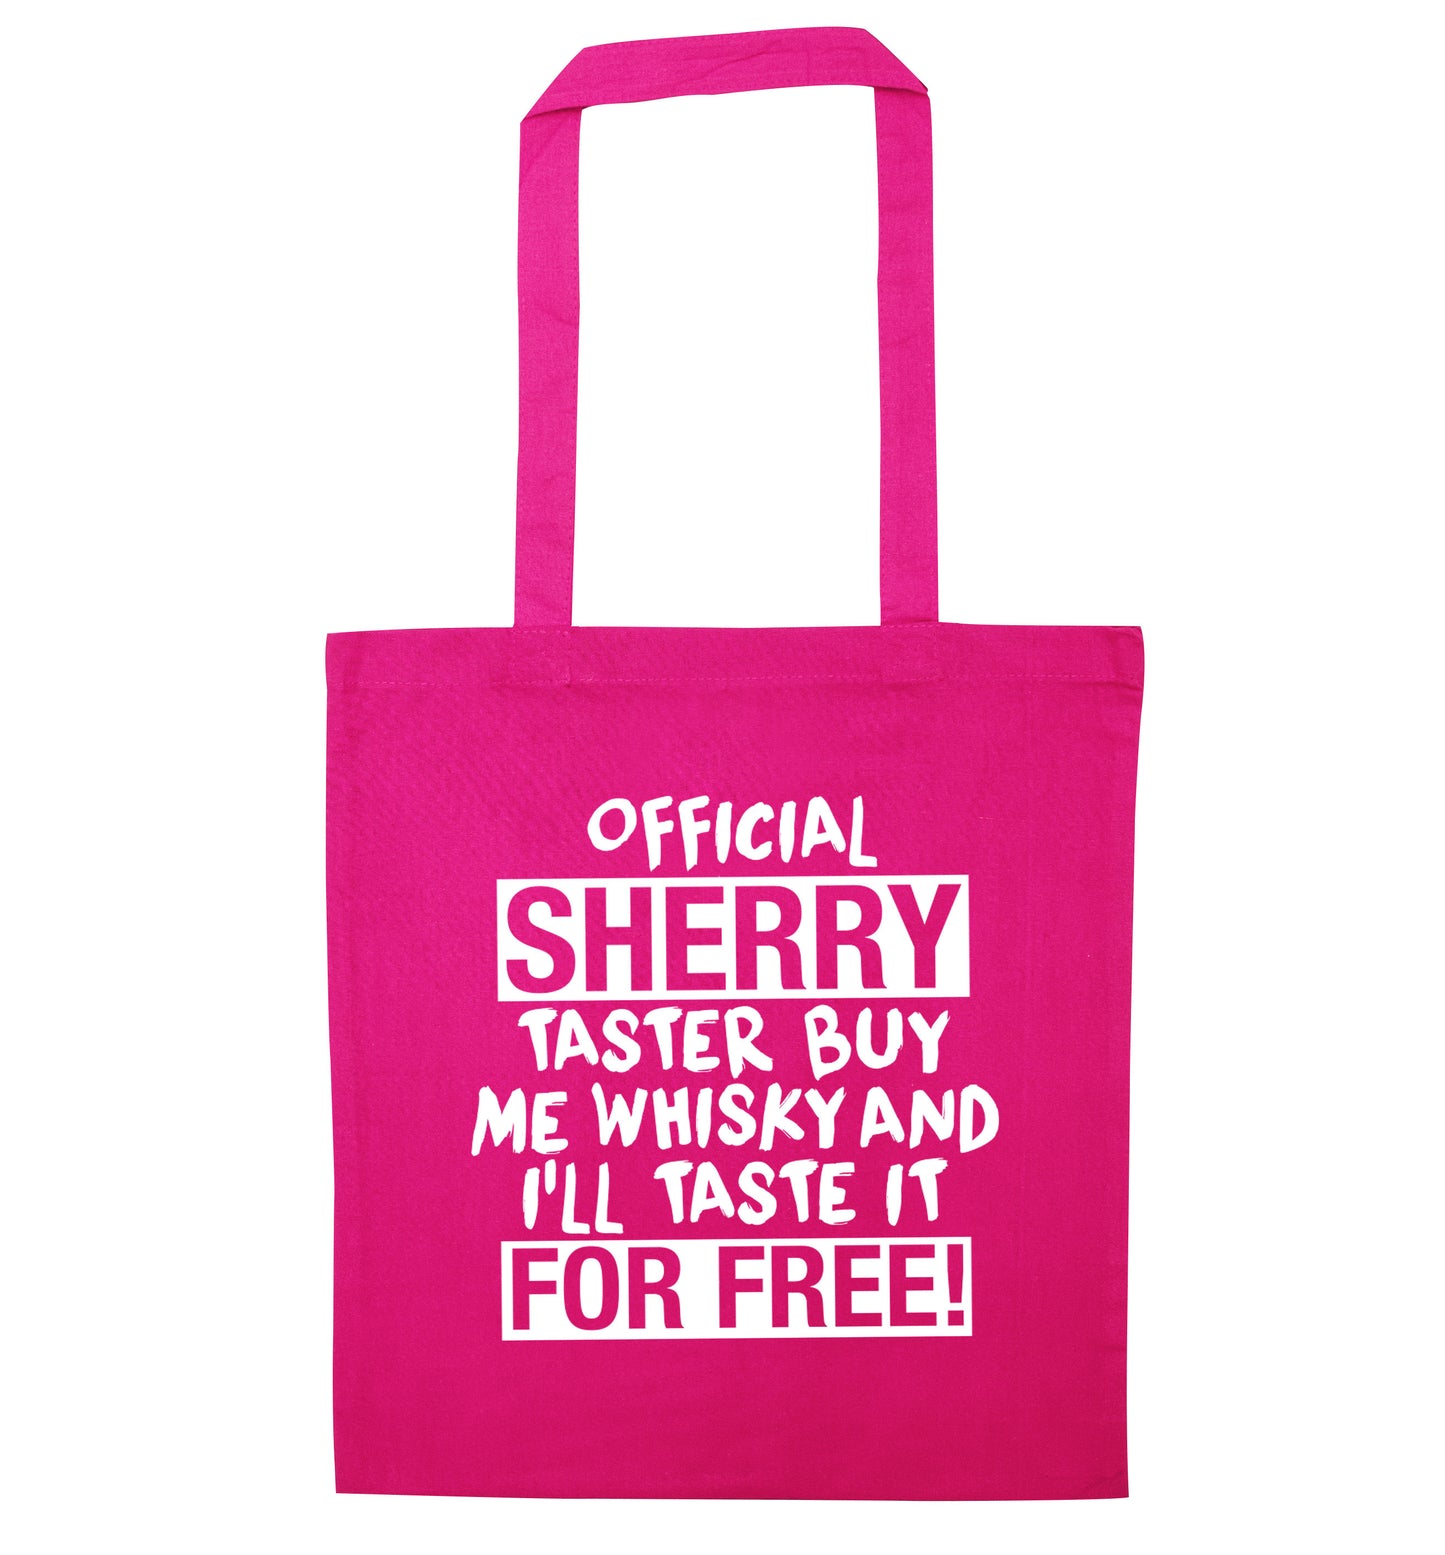 Official sherry taster buy me sherry and I'll taste it for free pink tote bag